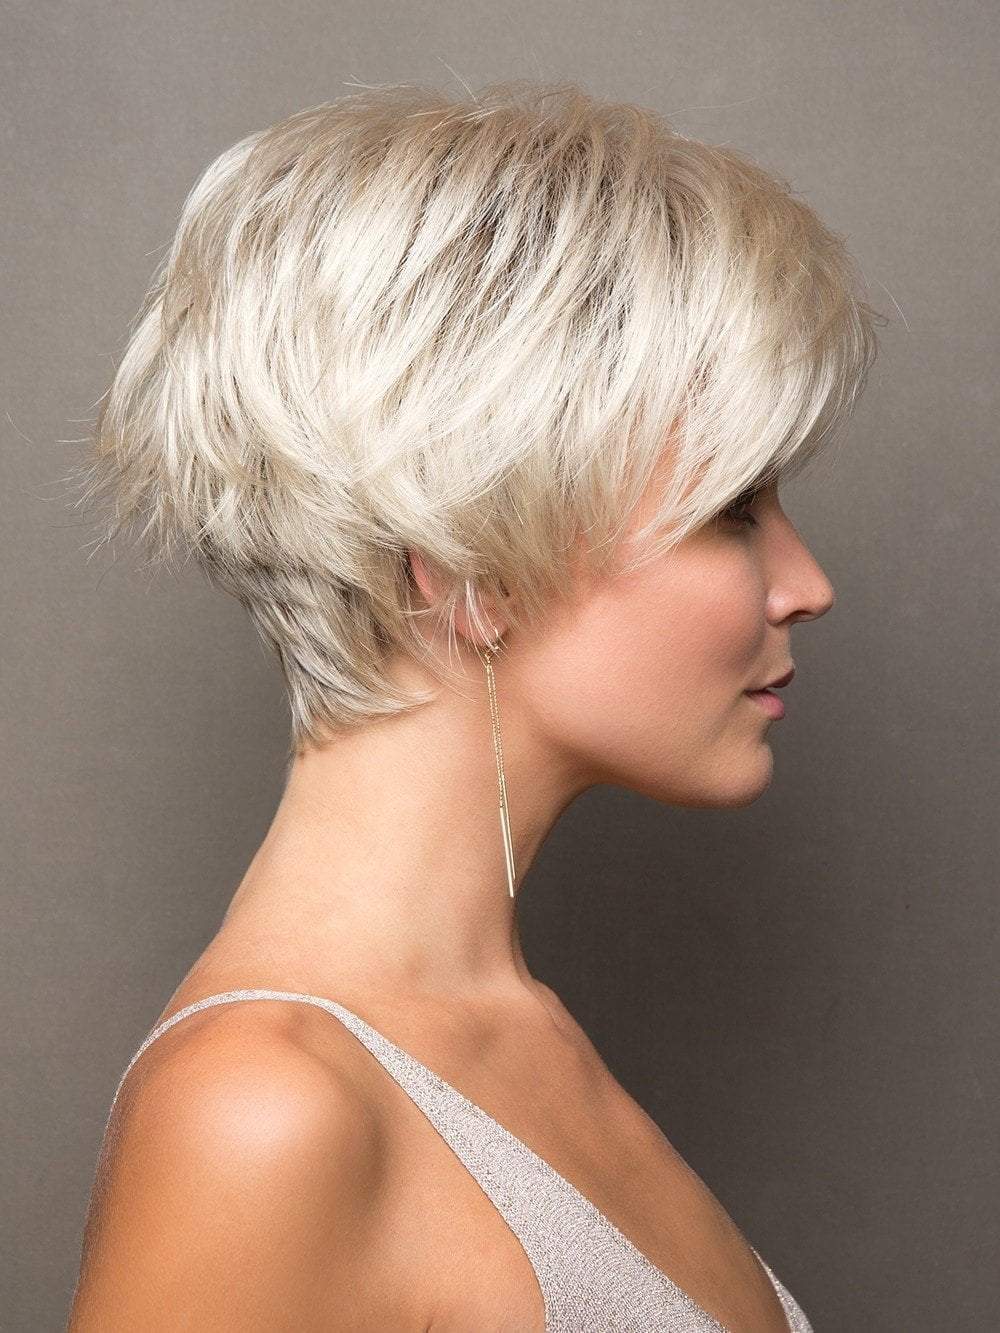 Loads of textured layers give this cut exceptional volume, movement, and style versatility